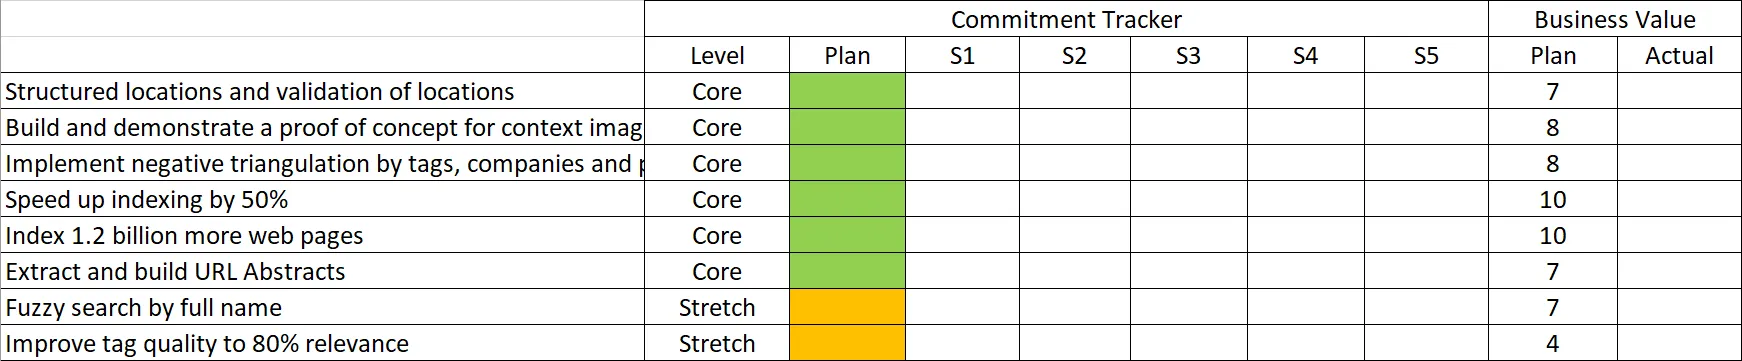 Figure 1: The Initial Commitment Tracker